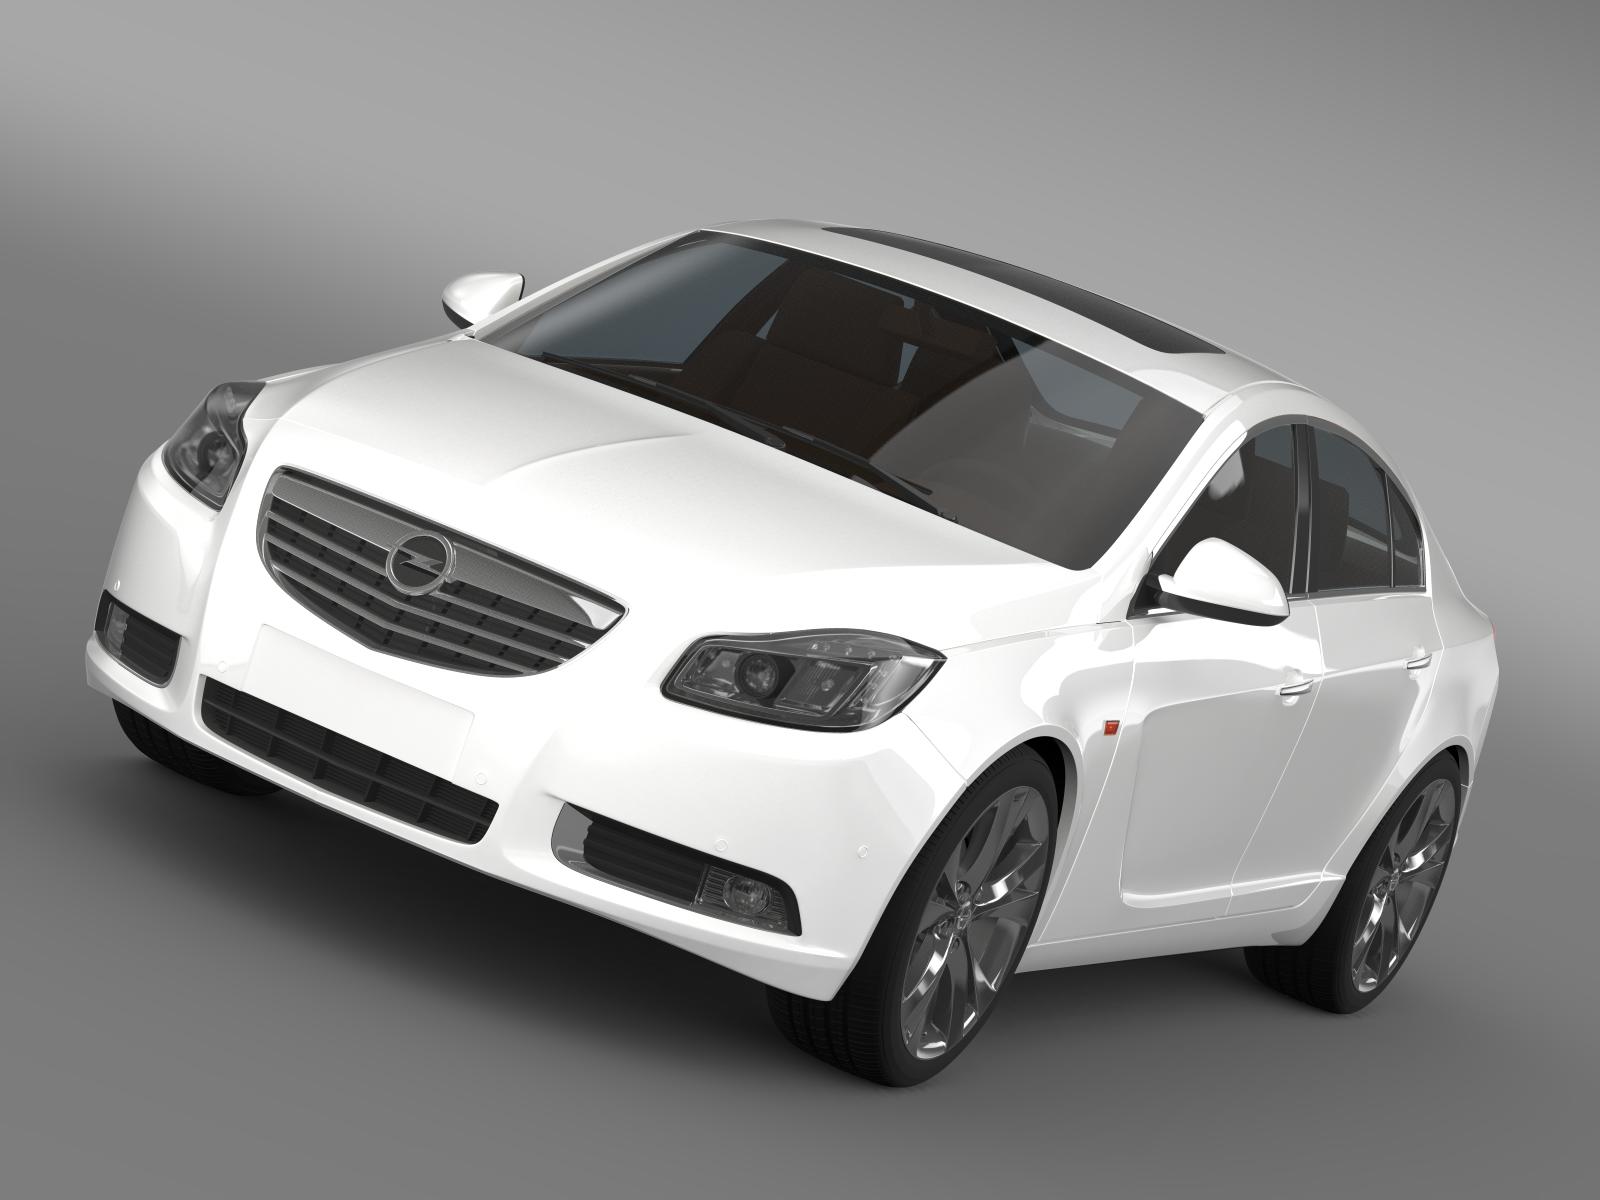 All OPEL Insignia Models by Year (2008-Present) - Specs, Pictures & History  - autoevolution